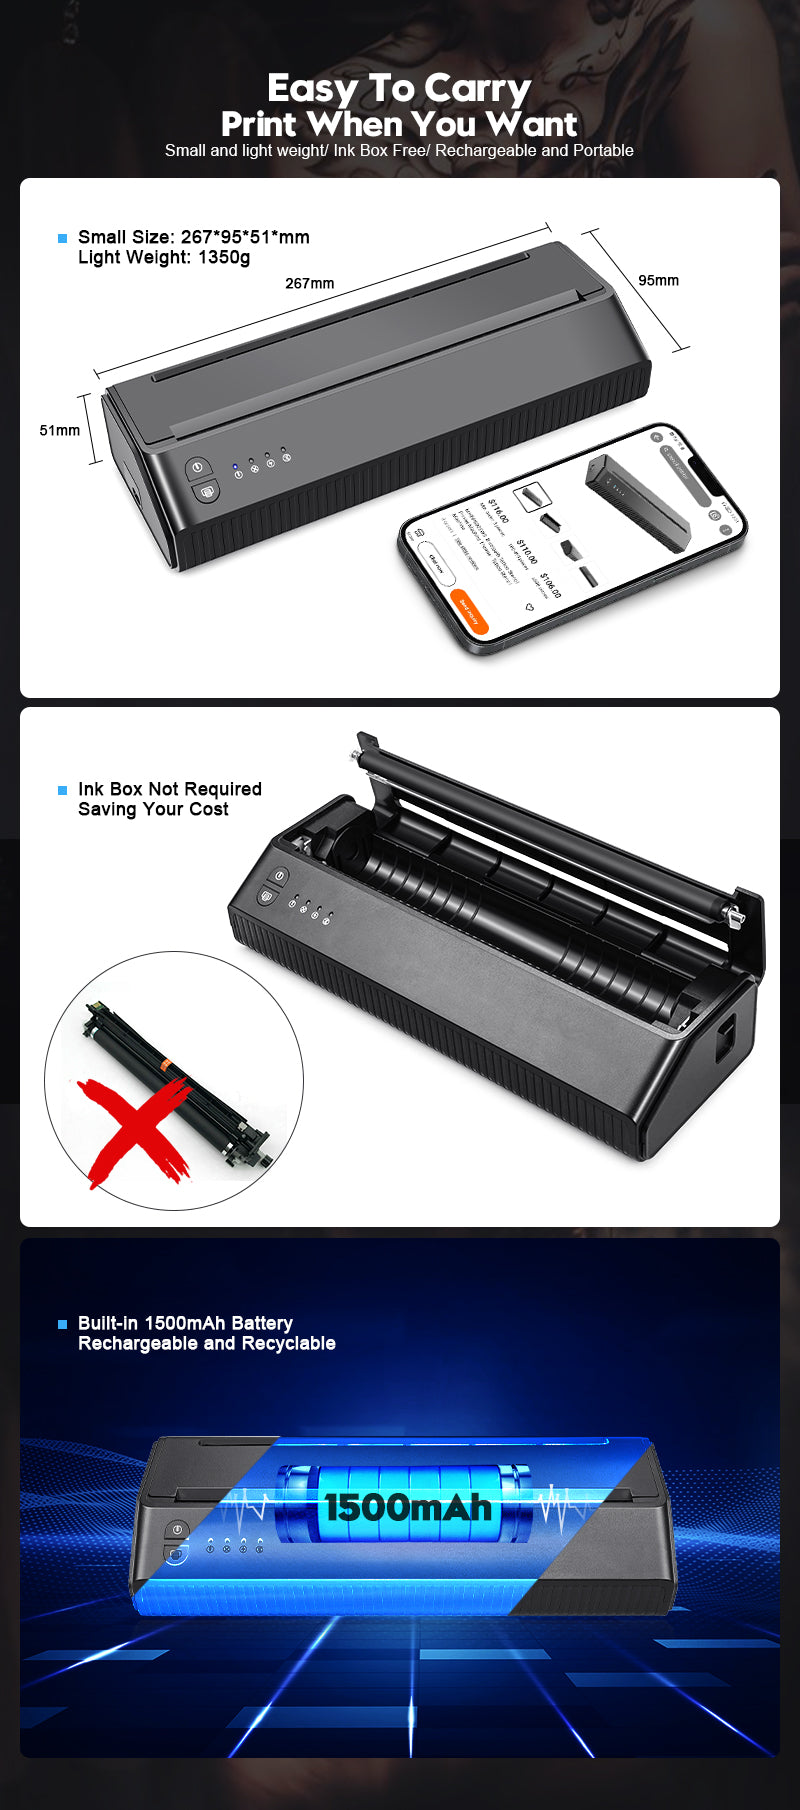 Wireless Tattoo Transfer Stencil Machine Thermal Copier with 10pcs Transfer Paper for tattooing Compatible with iOS＆Android Phone (Upgrade Version)